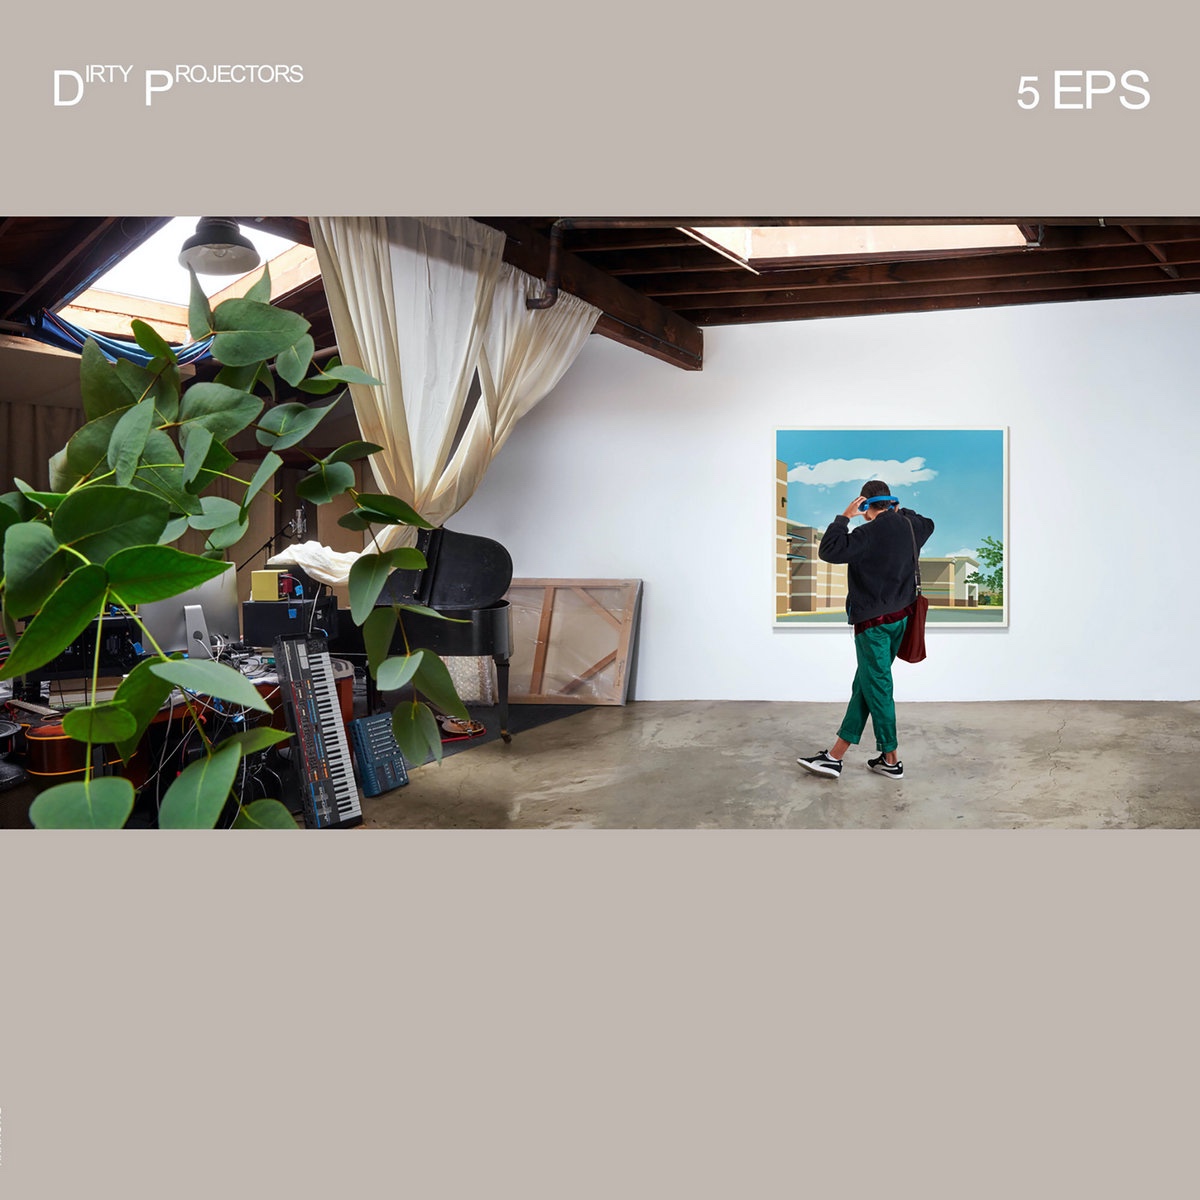 Dirty Projectors Rekindle Their Spark with '5EPs' 